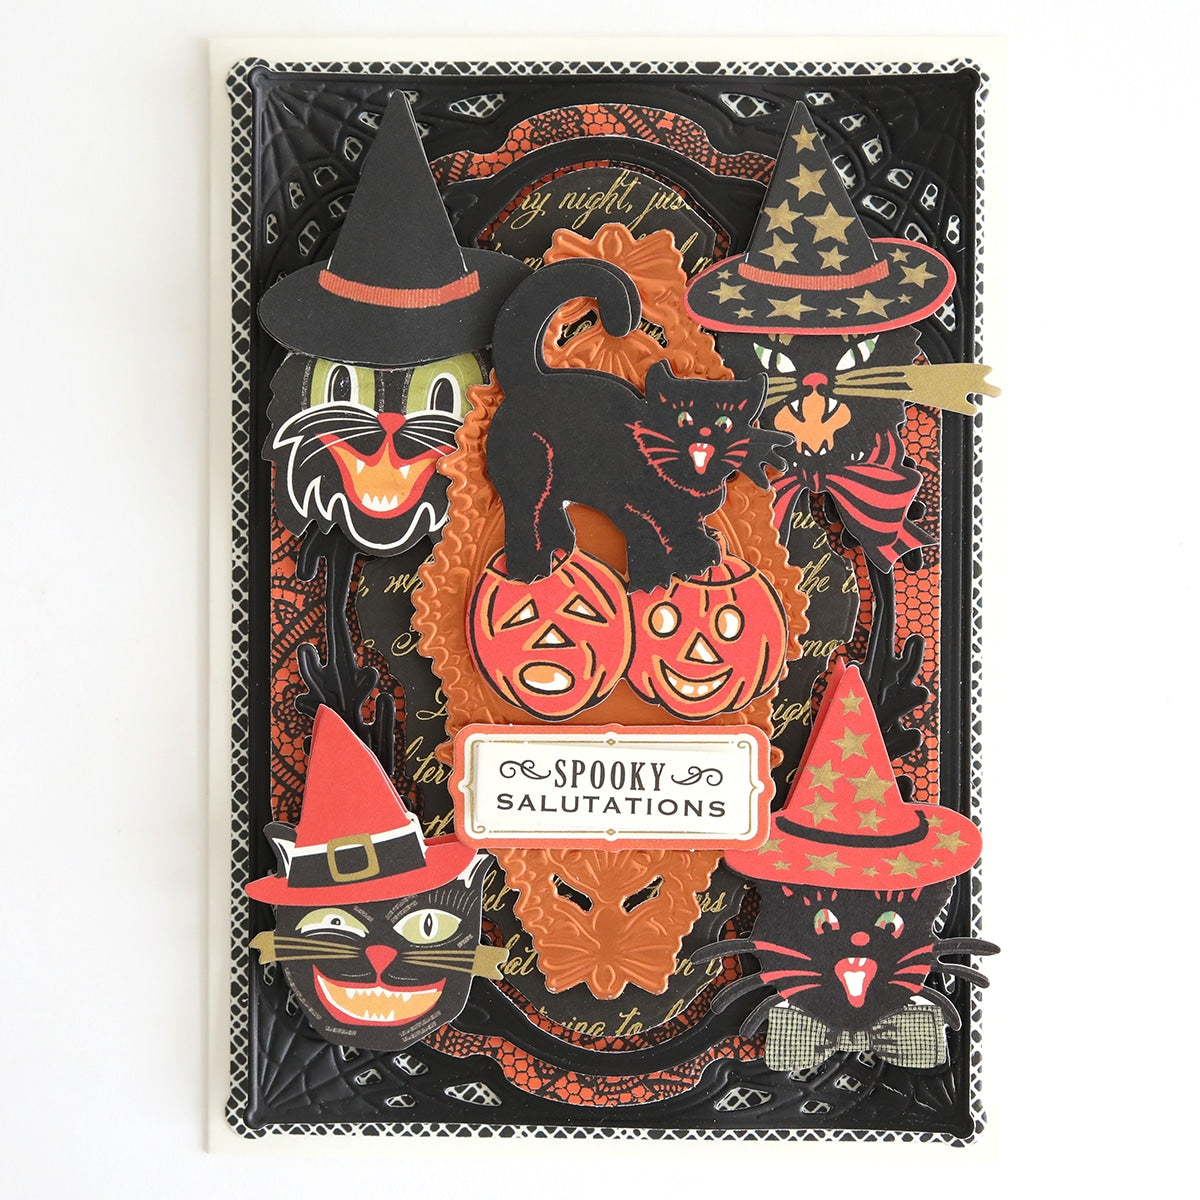 Retro Halloween Stickers with witches and jack o lanterns.